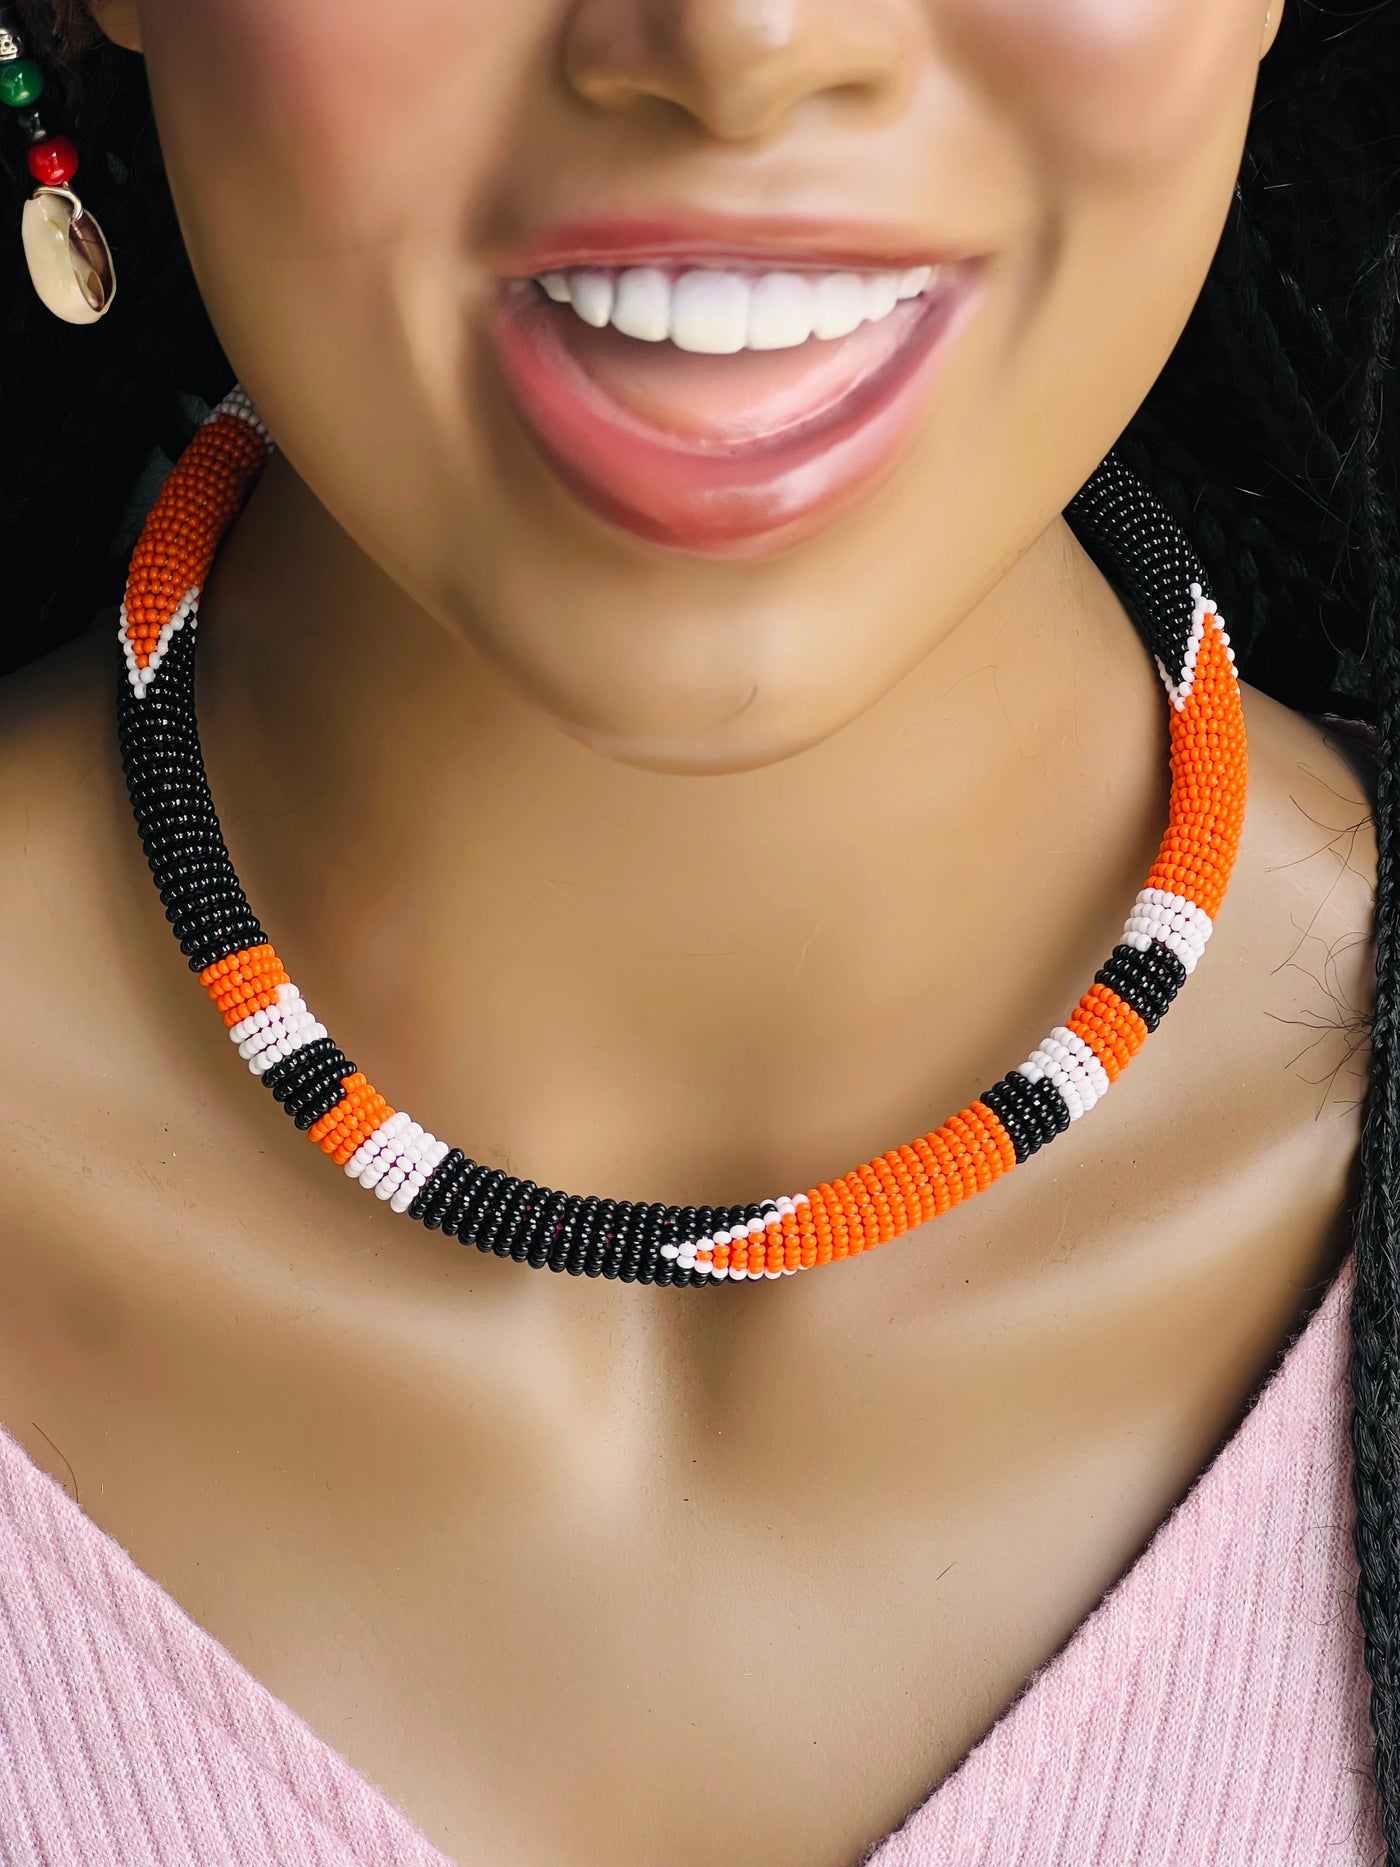 Handcrafted African Woman Necklace (Wholesale)